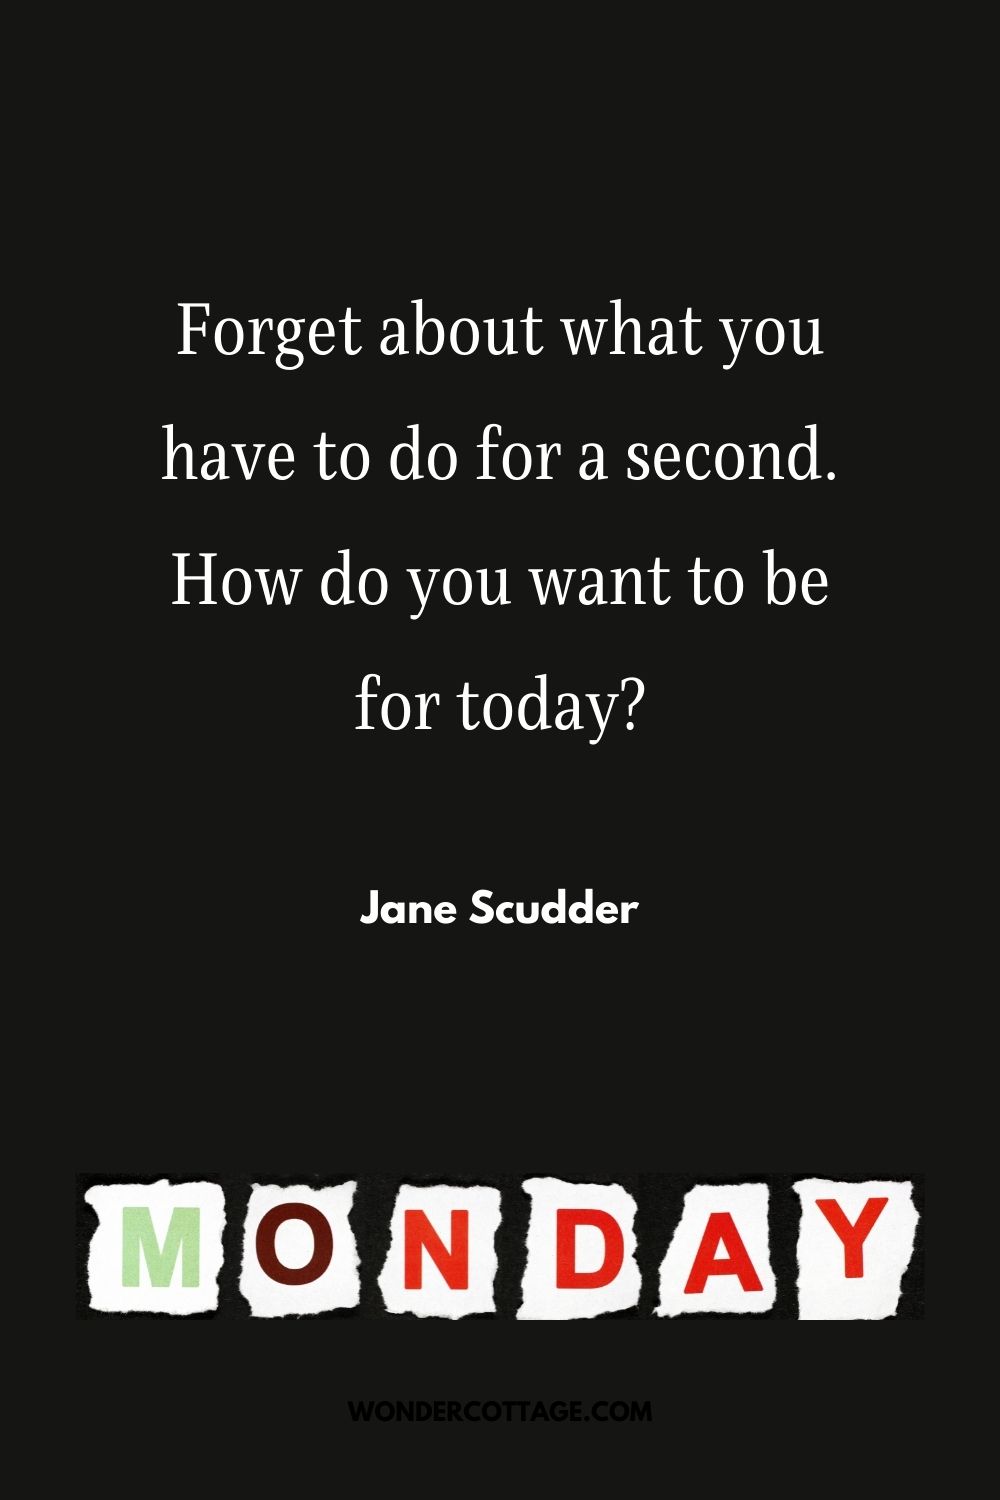 Forget about what you have to do for a second. How do you want to be for today?" Jane Scudder